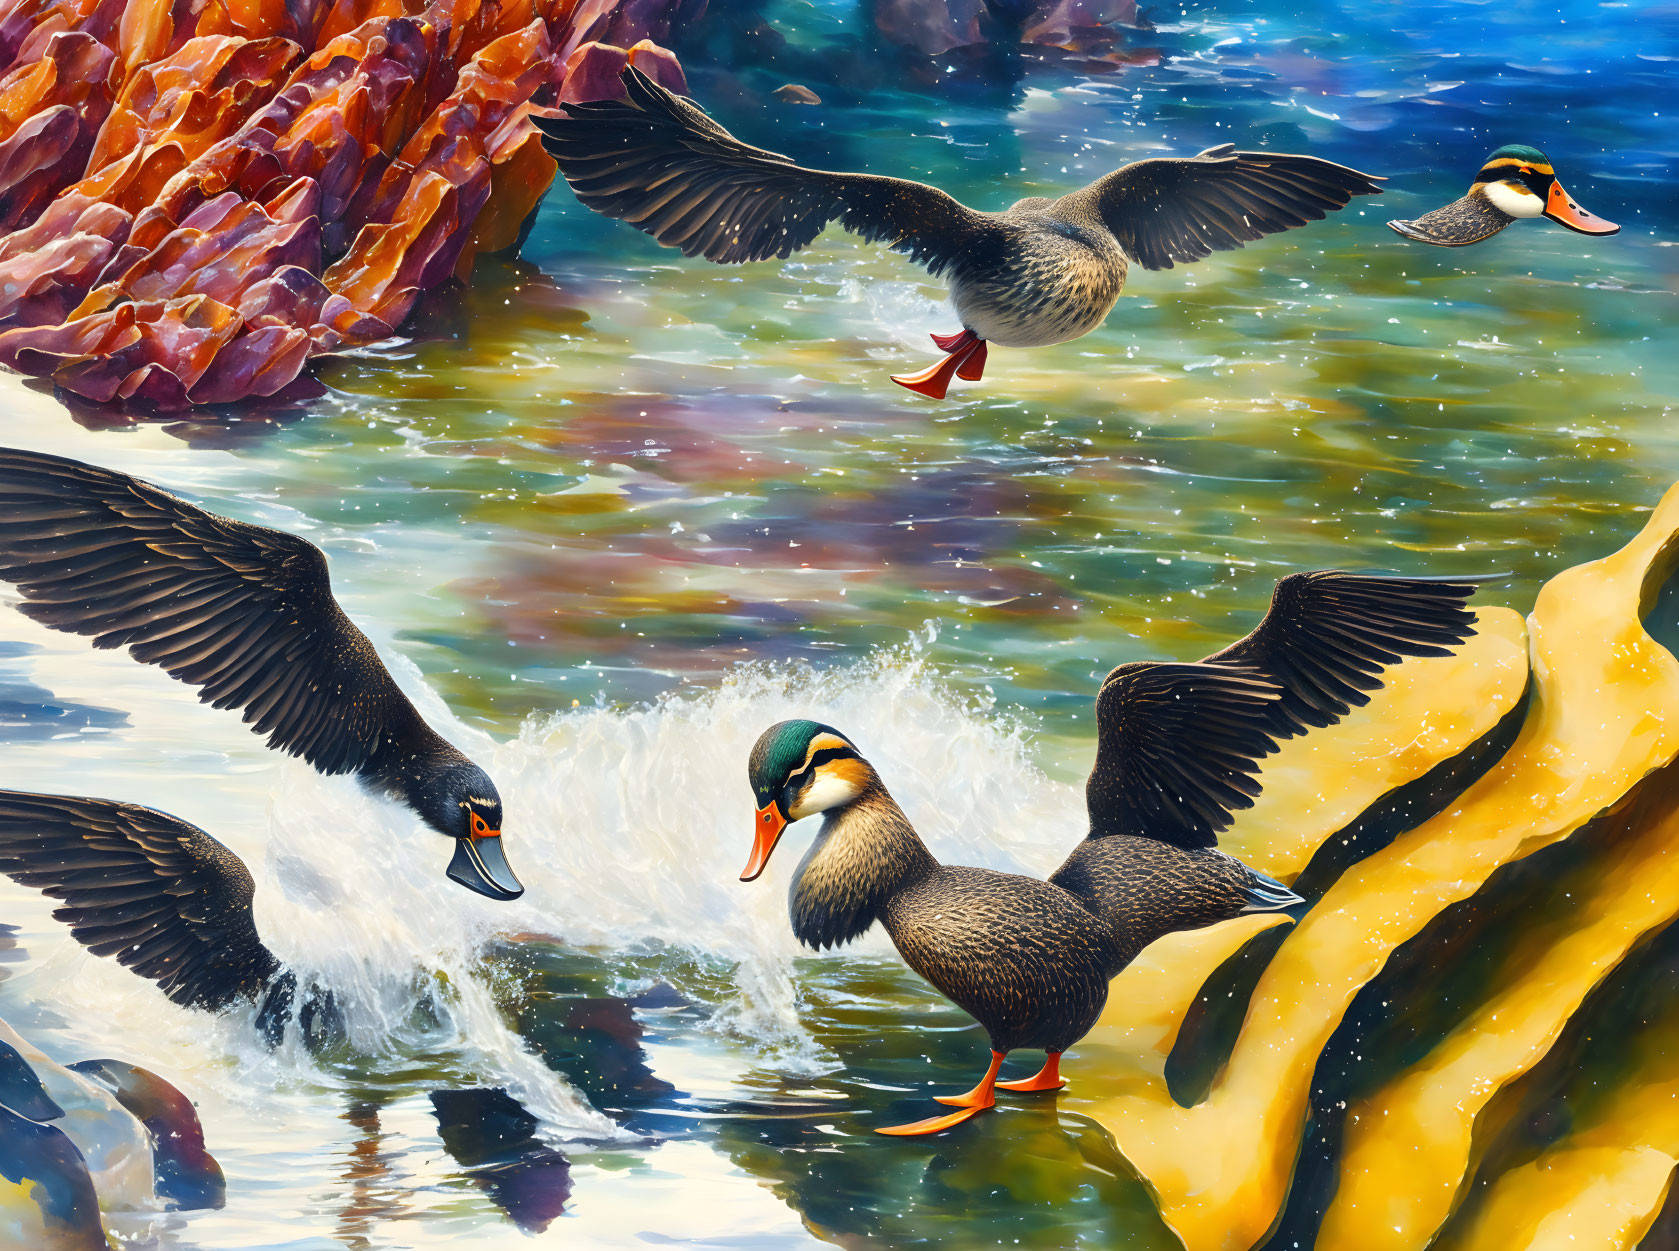 Four ducks flying over coastal landscape with rocky shores.